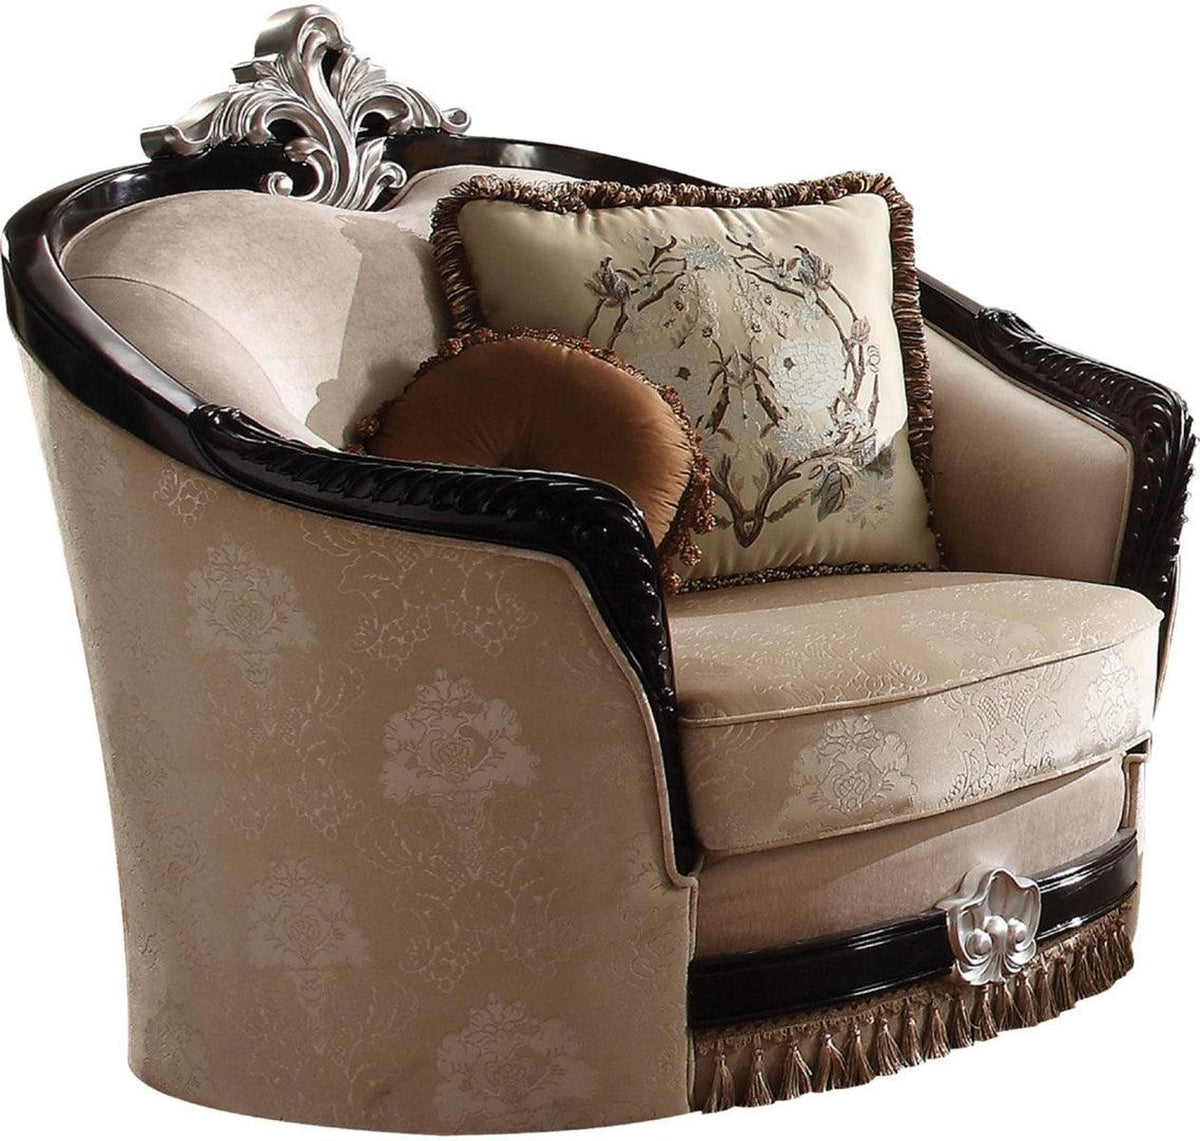 Acme Furniture Ernestine Chair with 2 Pillows in Tan and Black 52112  Las Vegas Furniture Stores